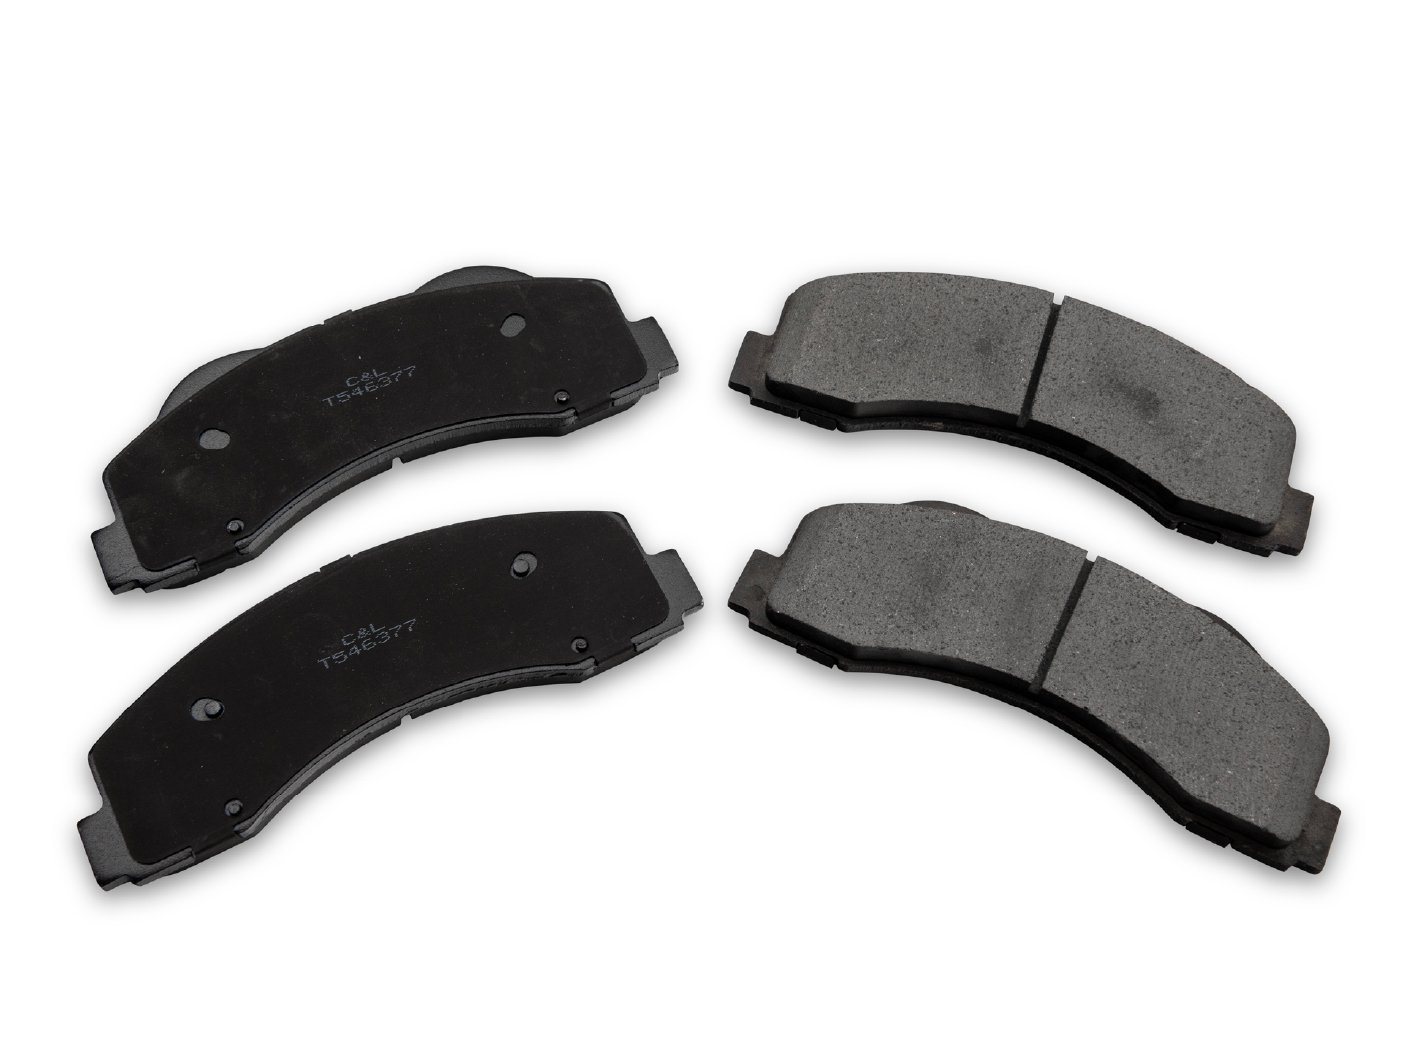 Two sets of brake pads